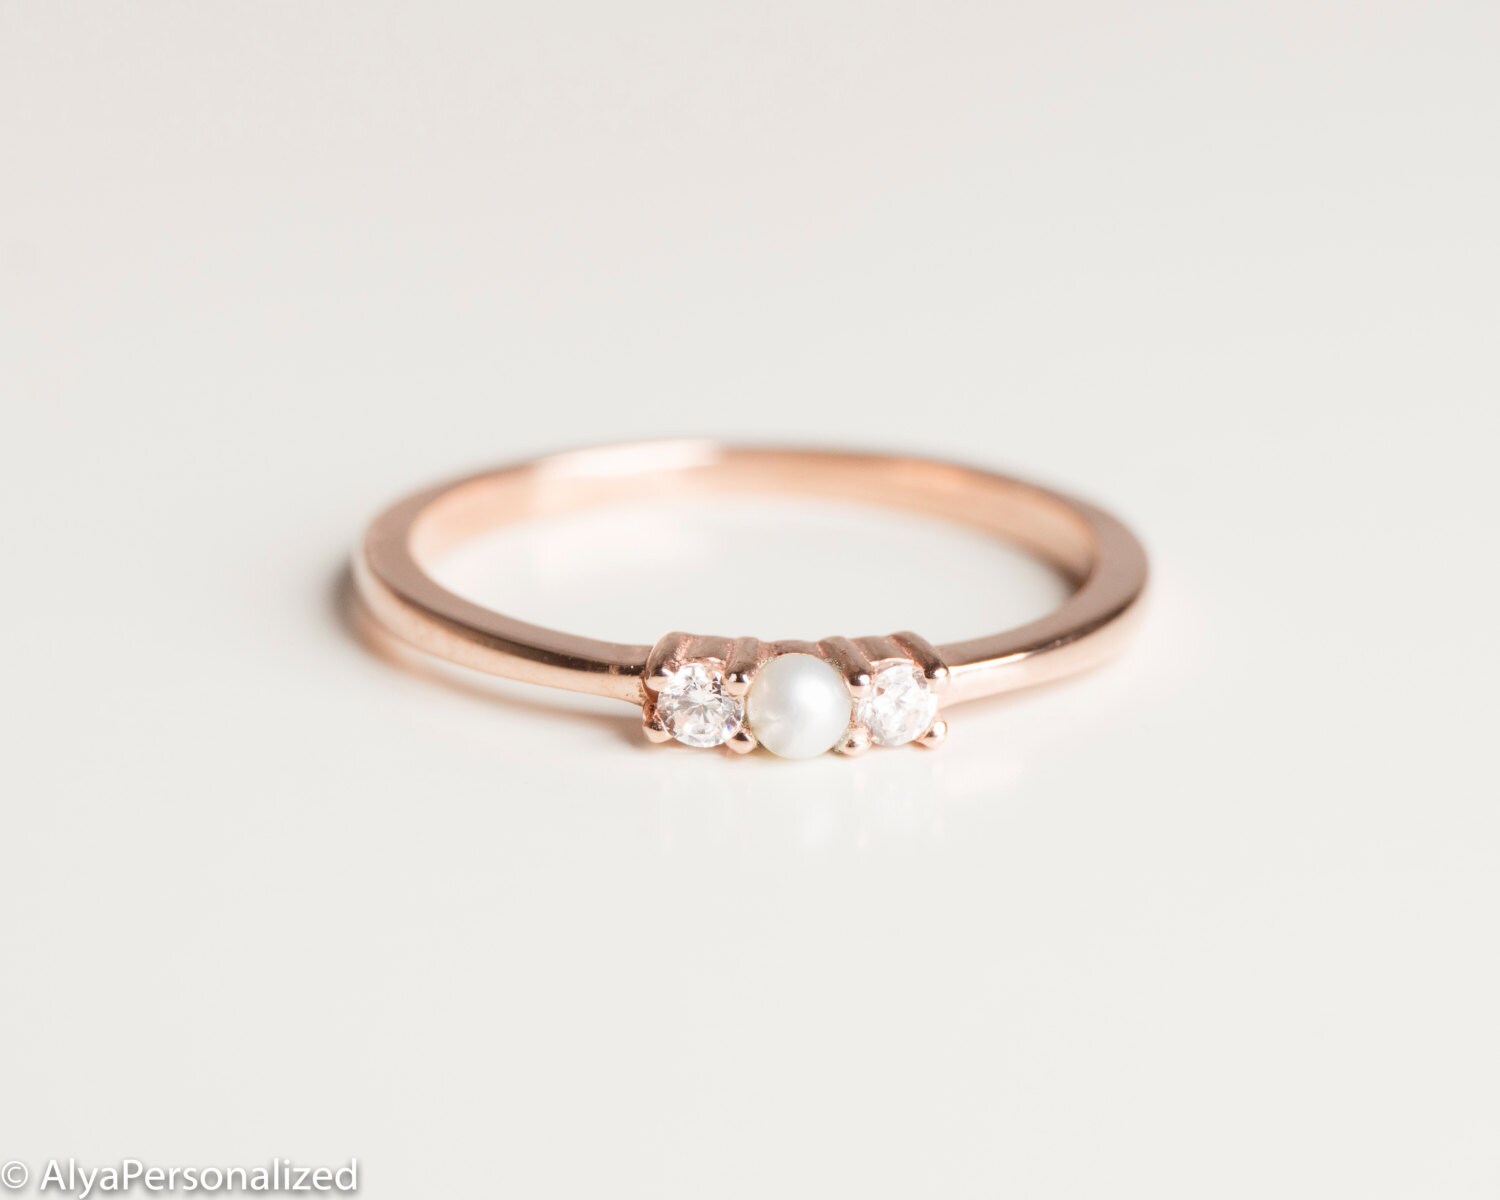 24 Rose Gold Engagement Rings By Famous Jewelers | Oh So Perfect Proposal